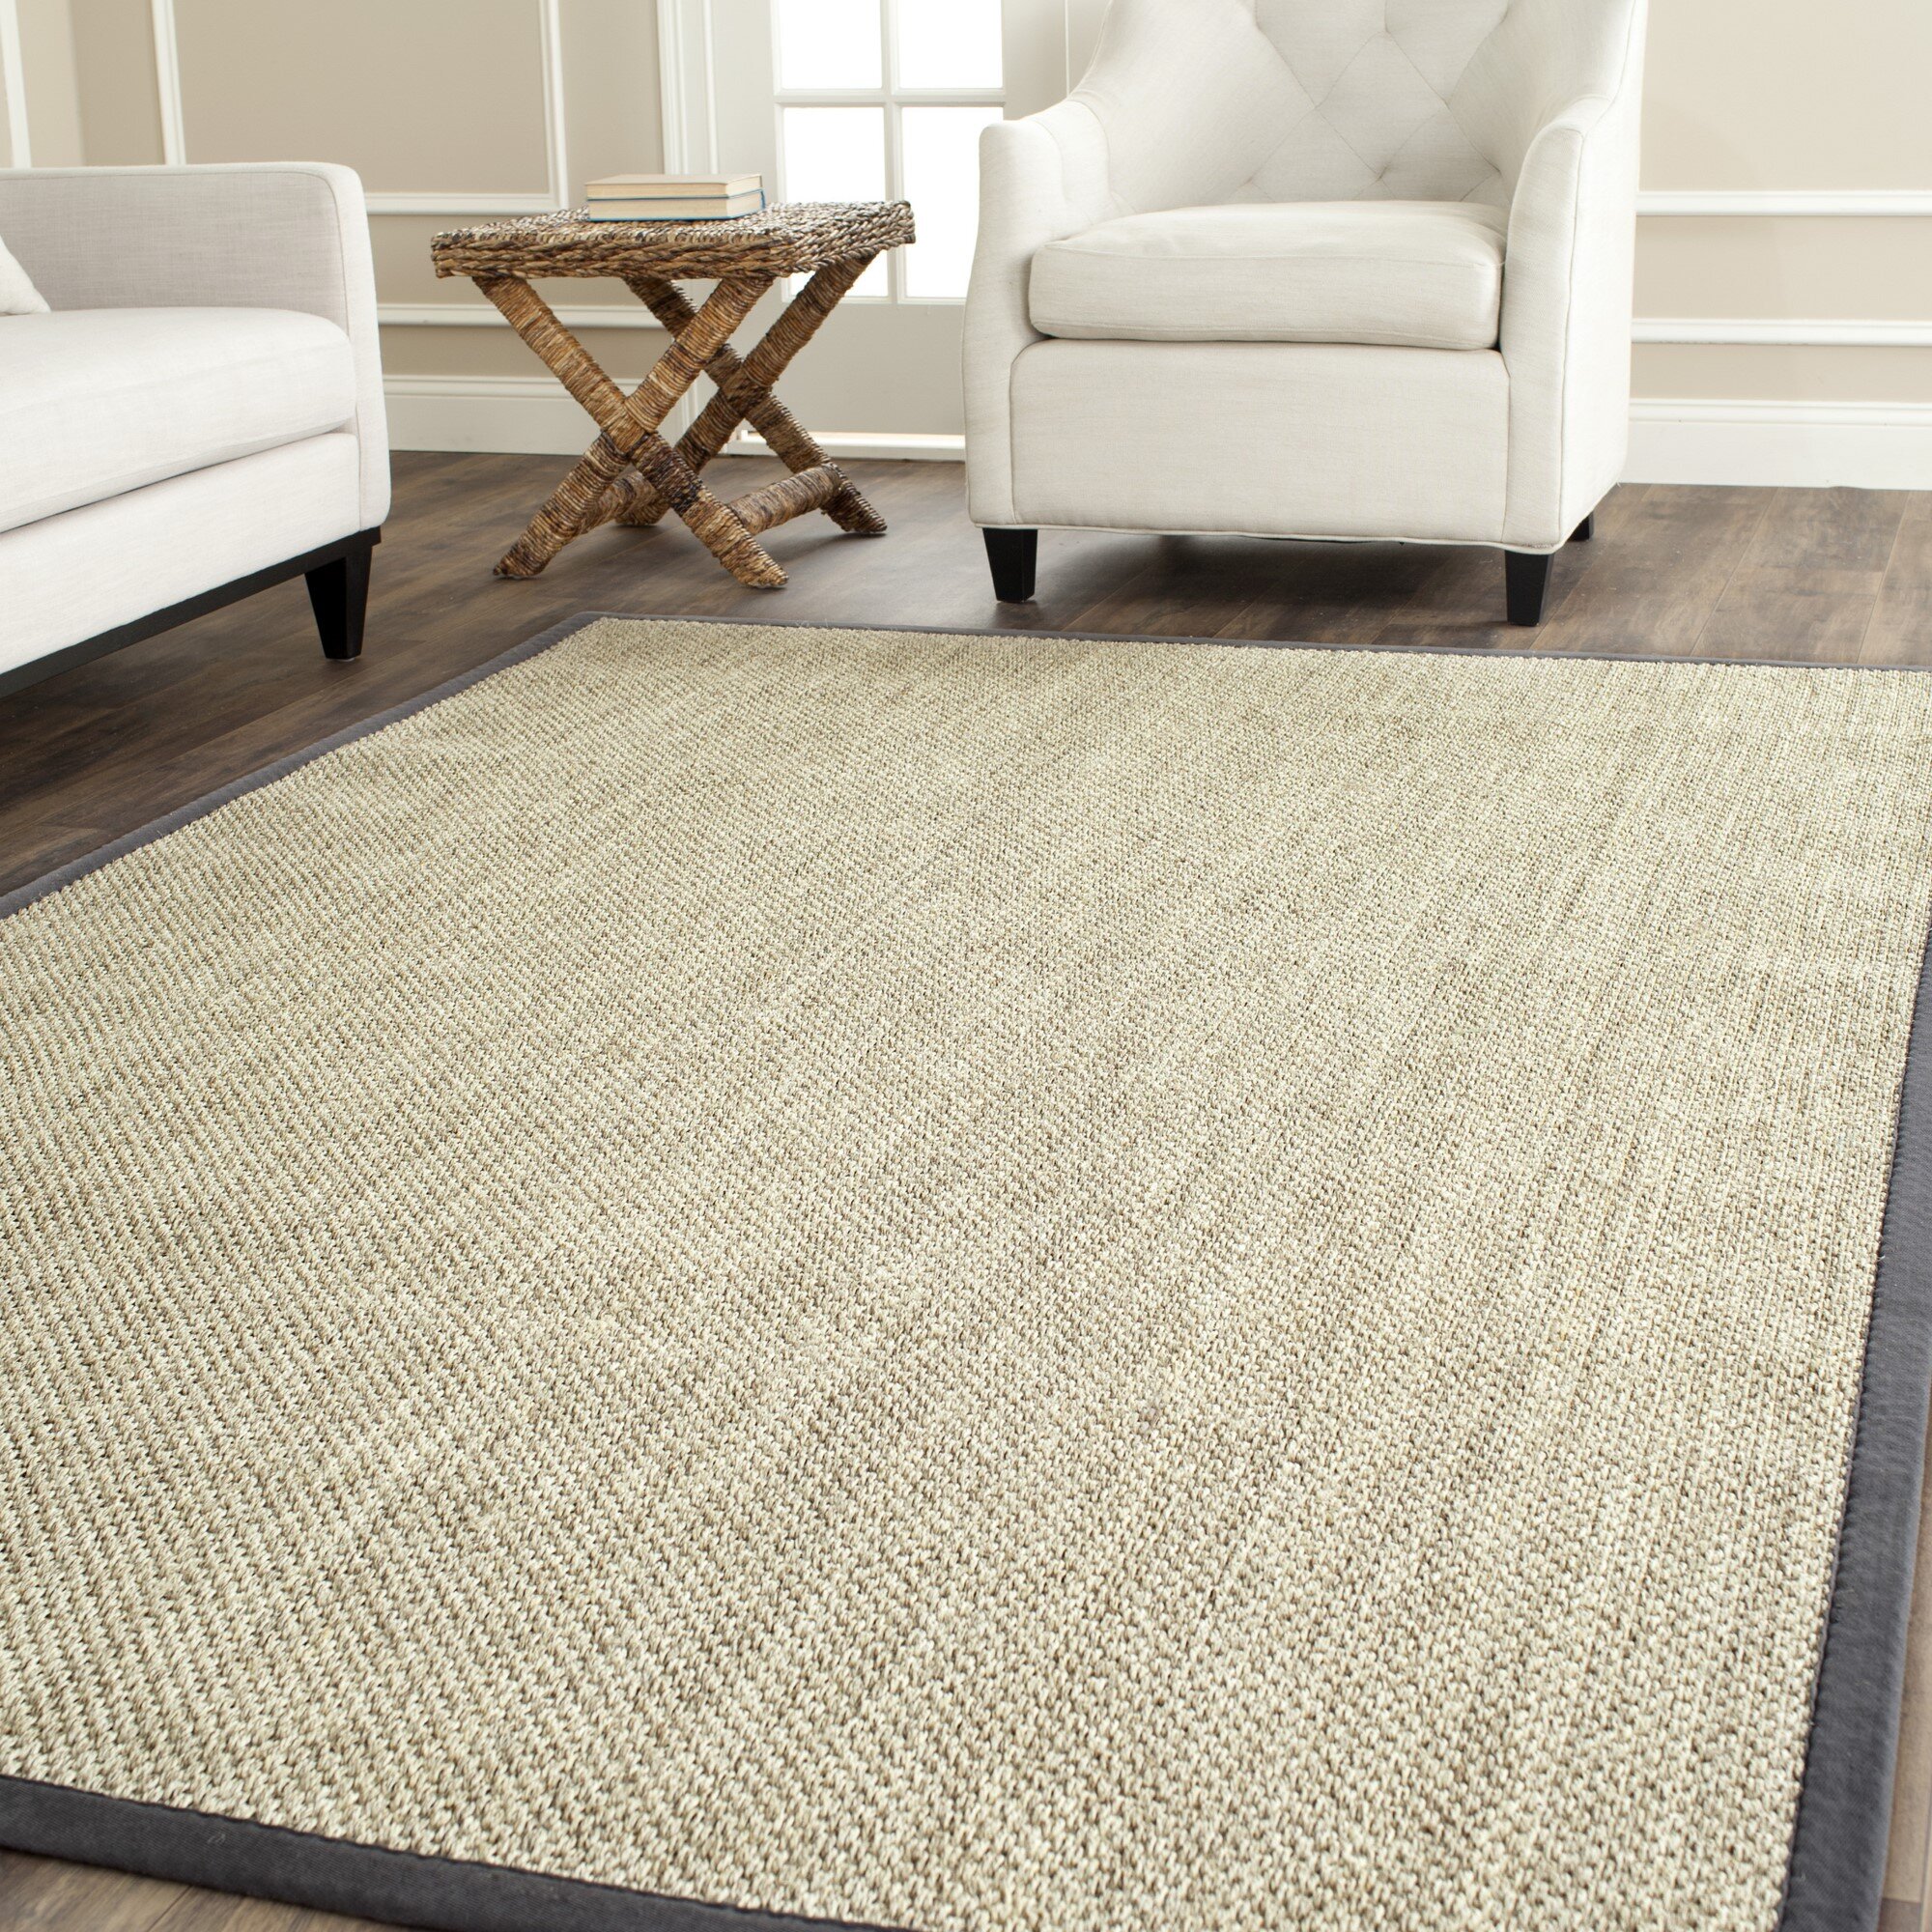 George Oliver Debroh Area Rug in Marble/Gray & Reviews | Wayfair